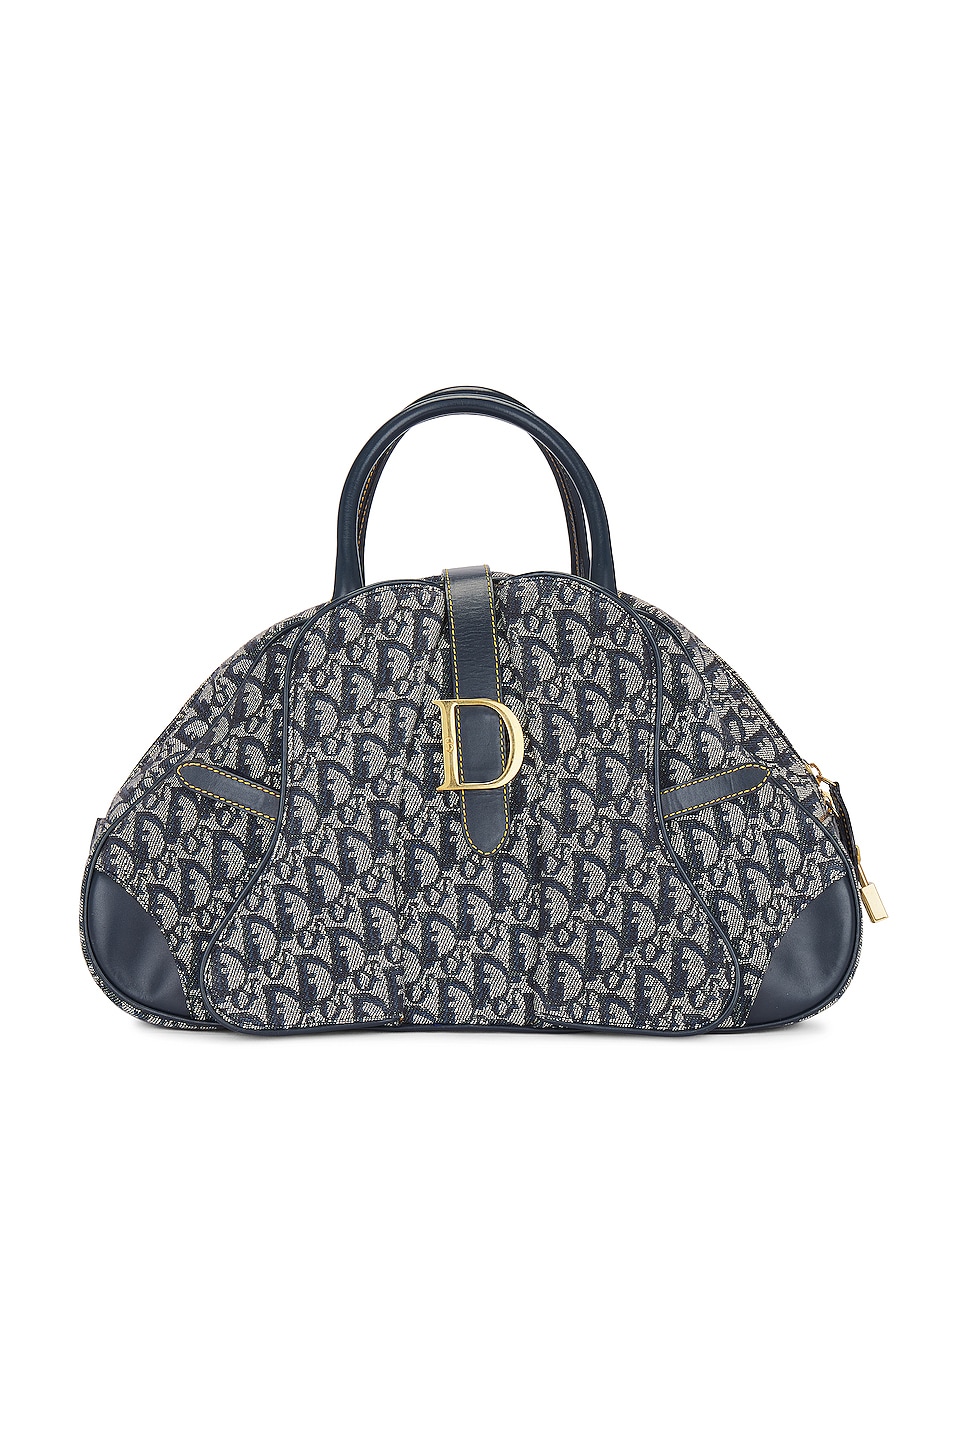 Dior - Authenticated Trotter Handbag - Cloth Navy for Women, Very Good Condition